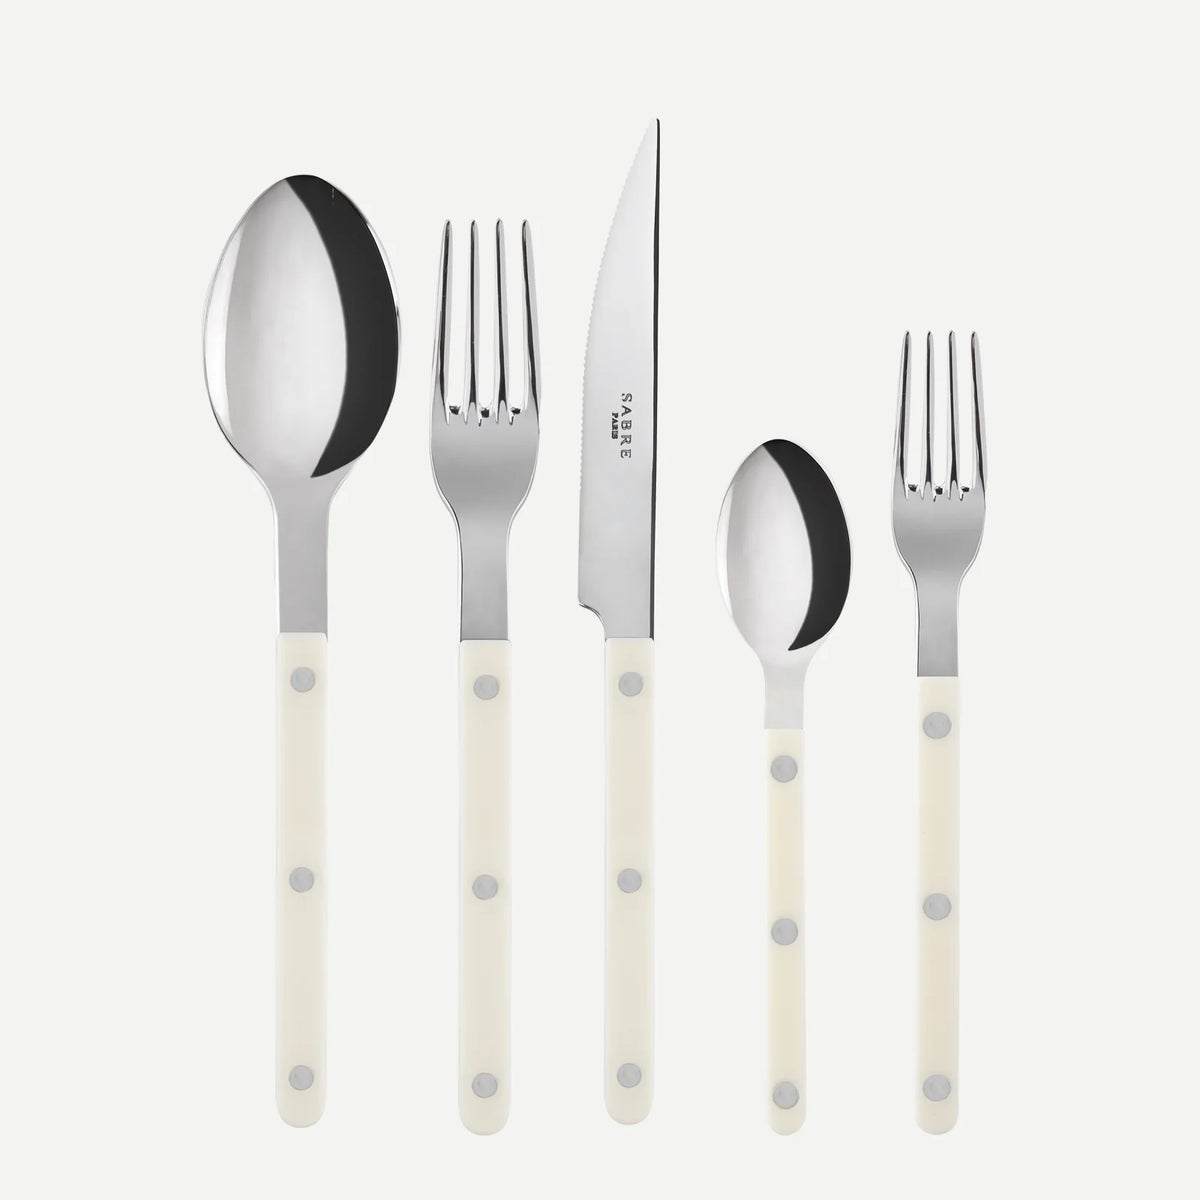 Sabre Bistrot 5 Piece Cutlery Set in Ivory